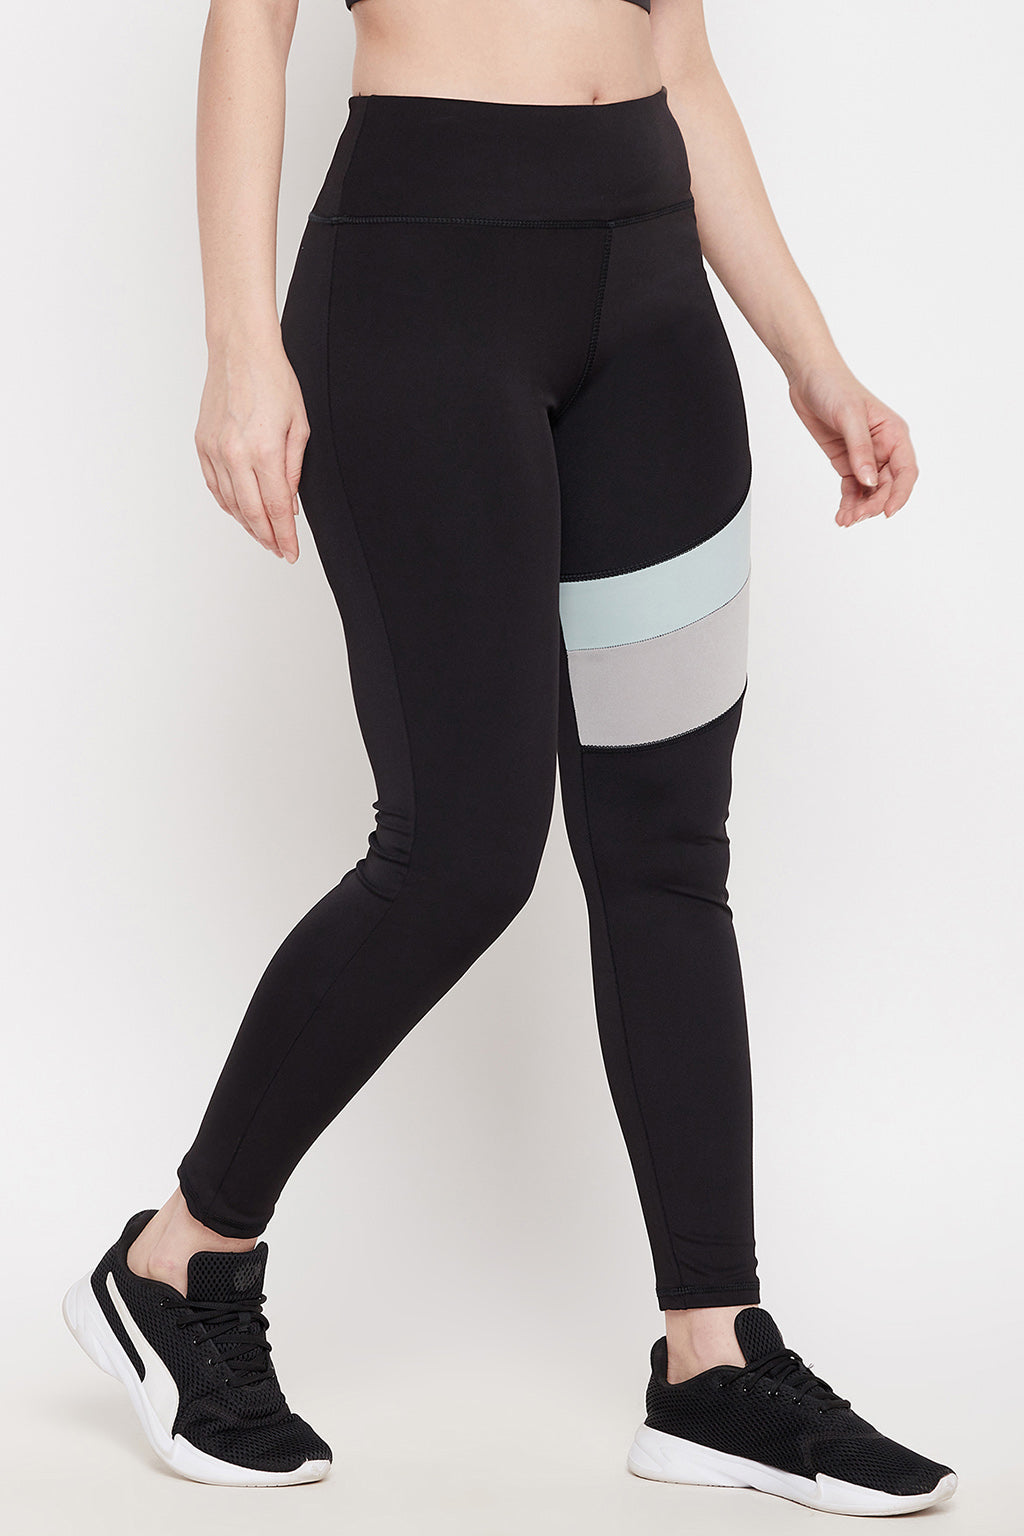 Black Snug-Fit High-Rise Active Tights